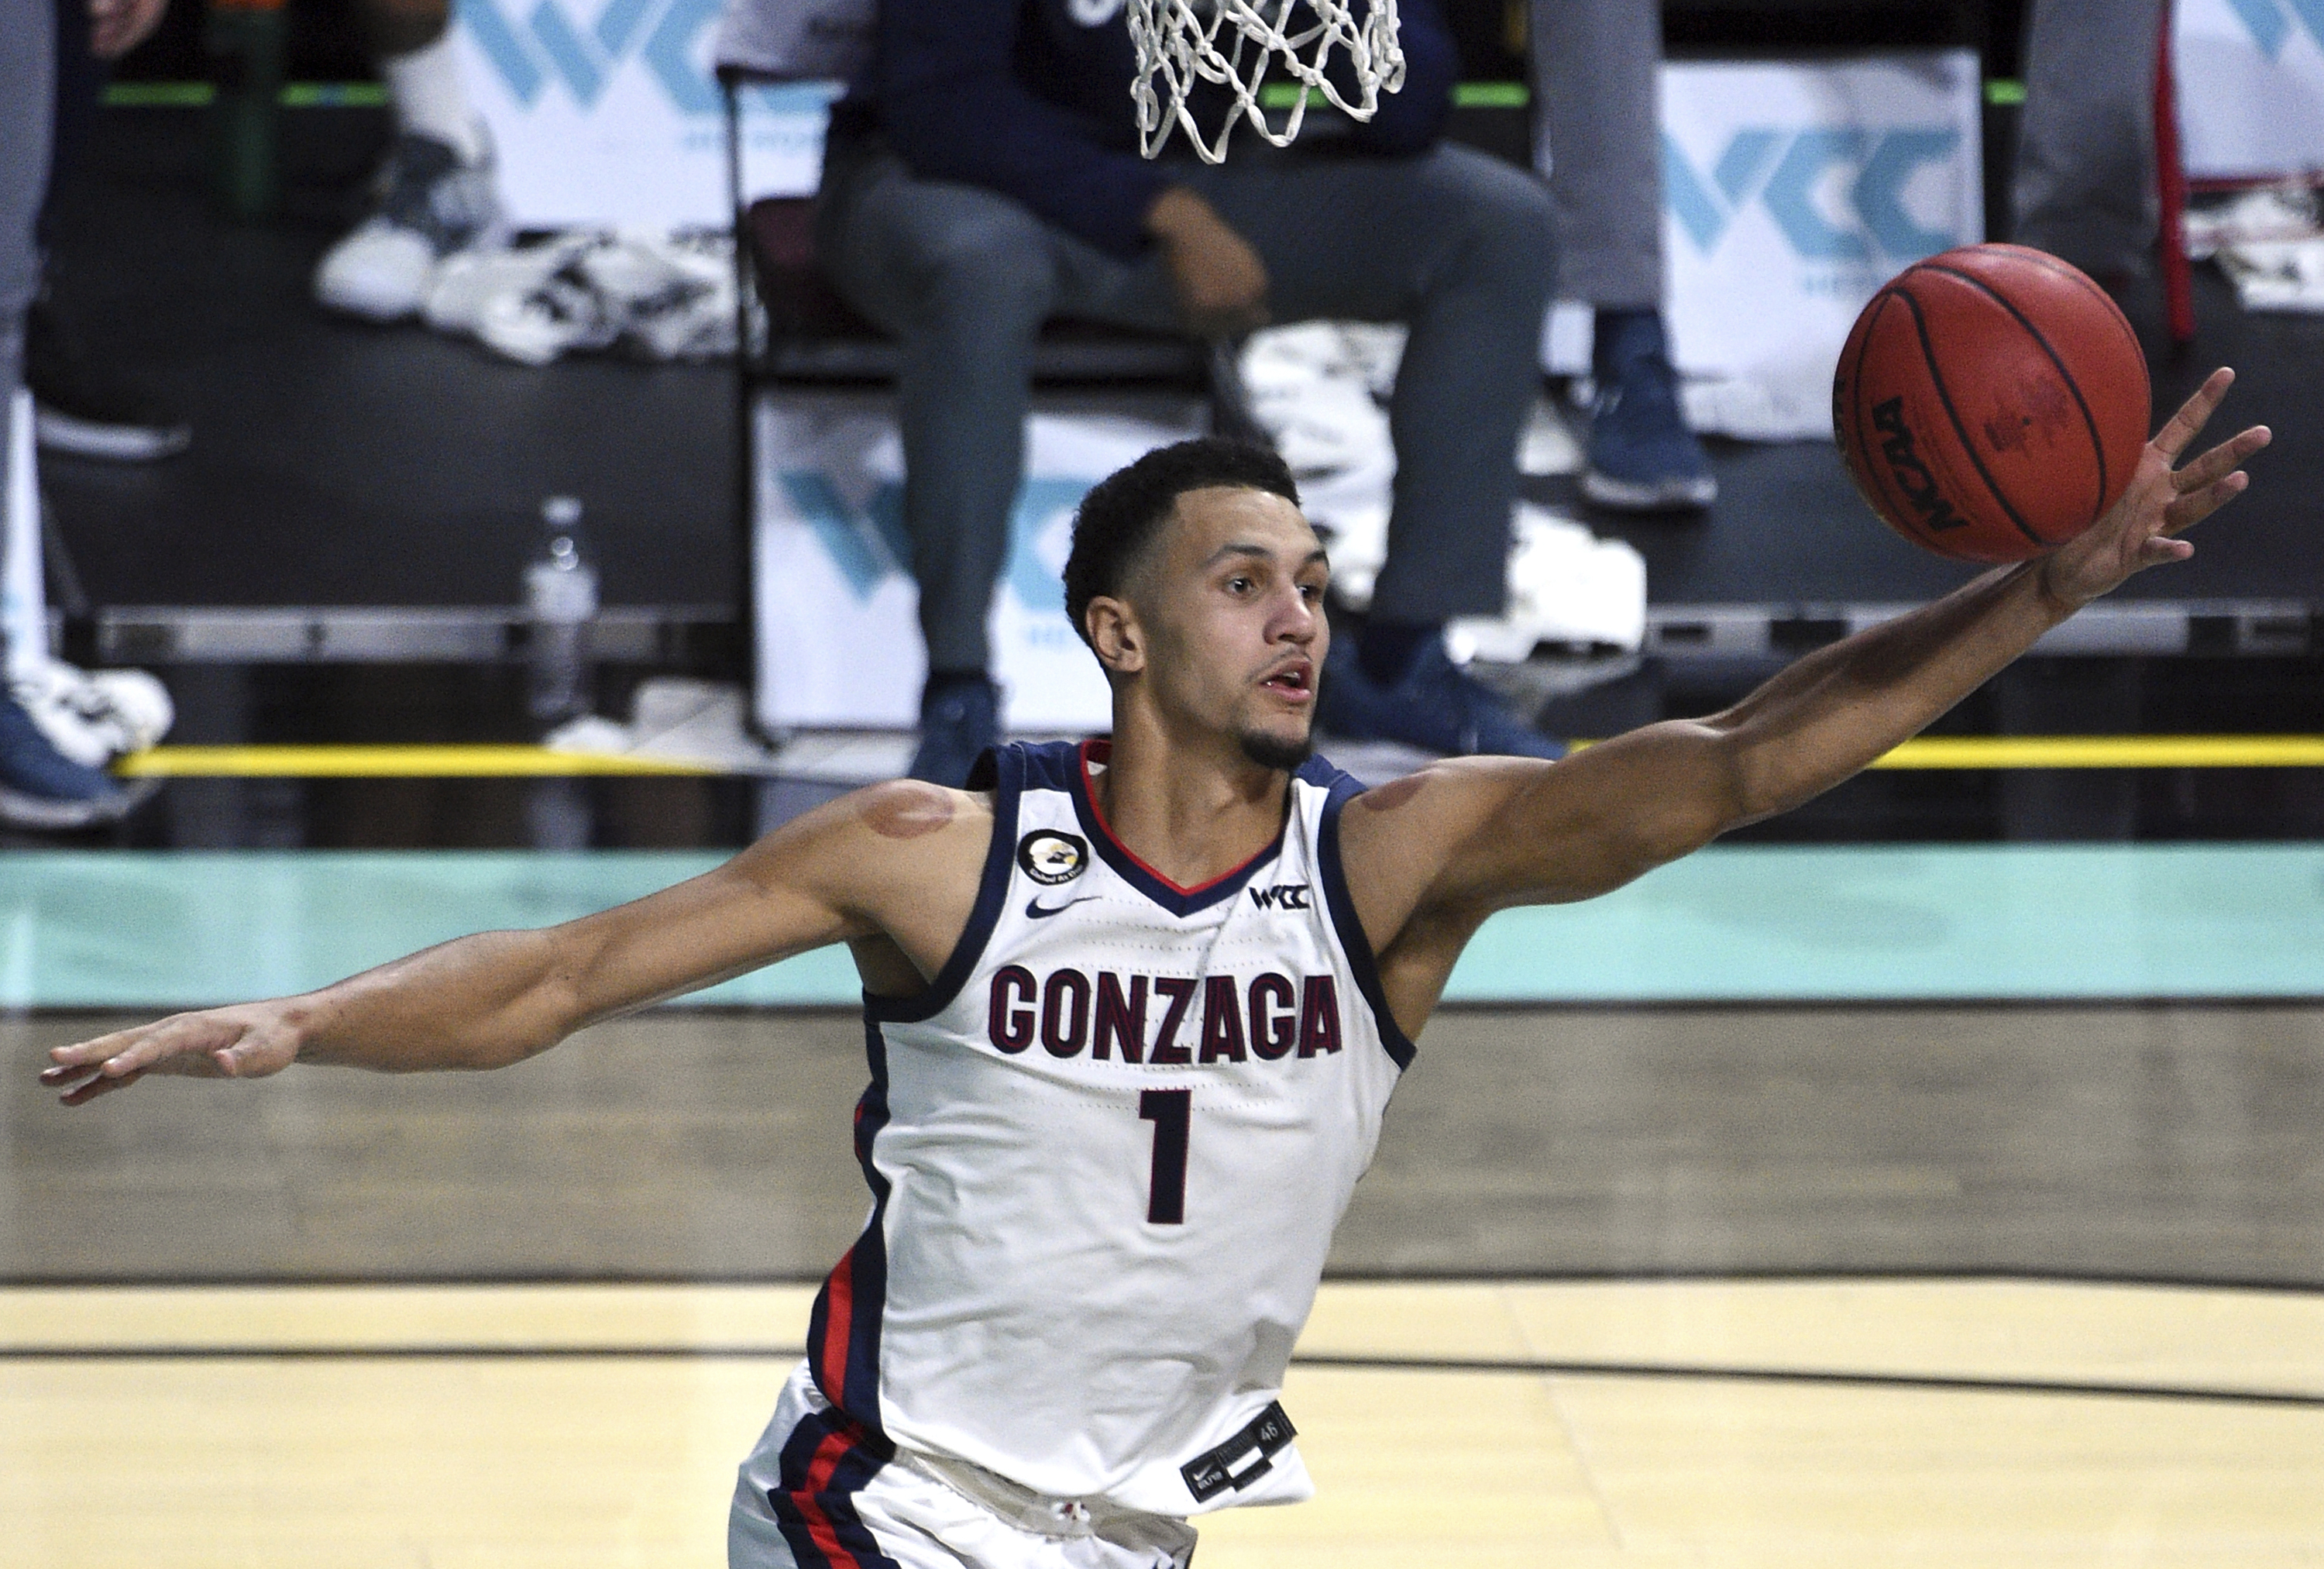 Gonzaga vs. BYU: Game time, TV schedule, and how to stream online